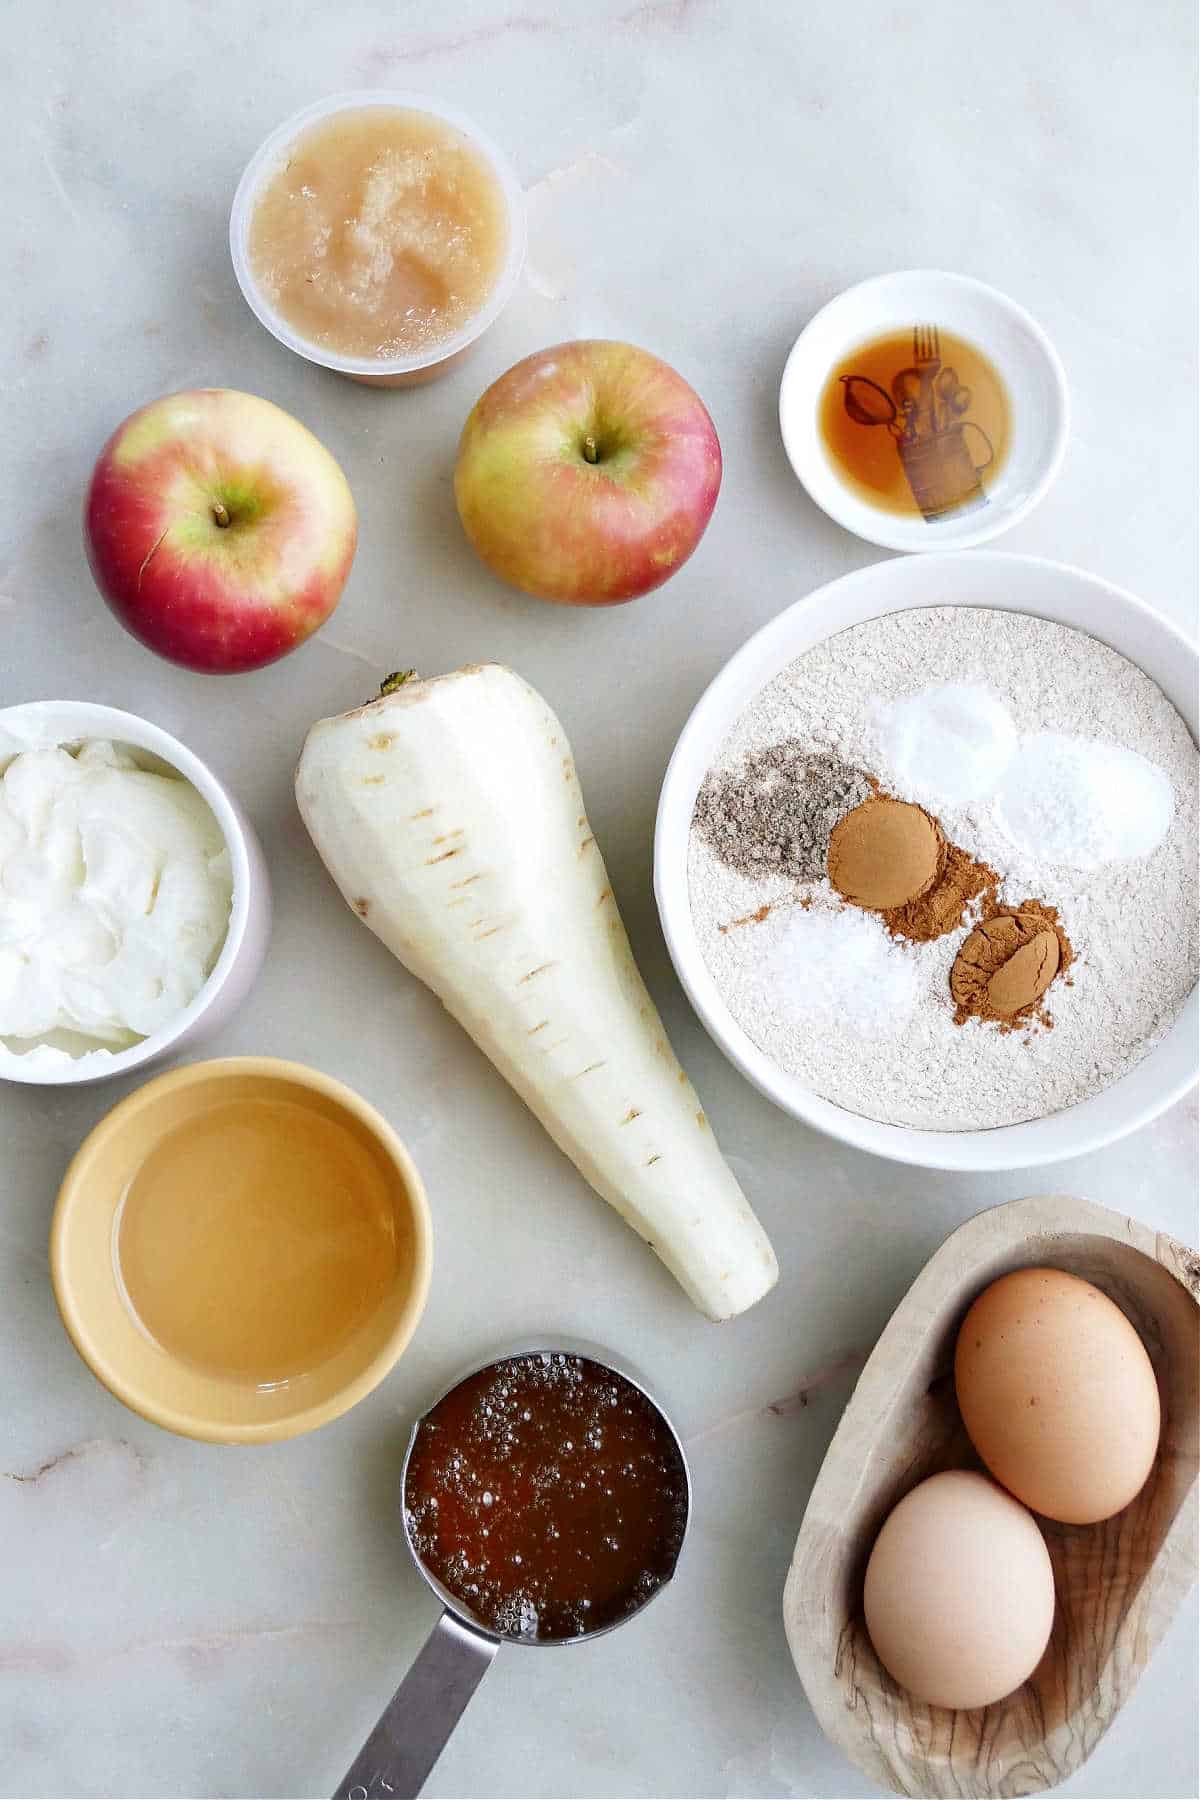 apples, applesauce, a parsnip, eggs, honey, oil, yogurt, and dry ingredients on a counter